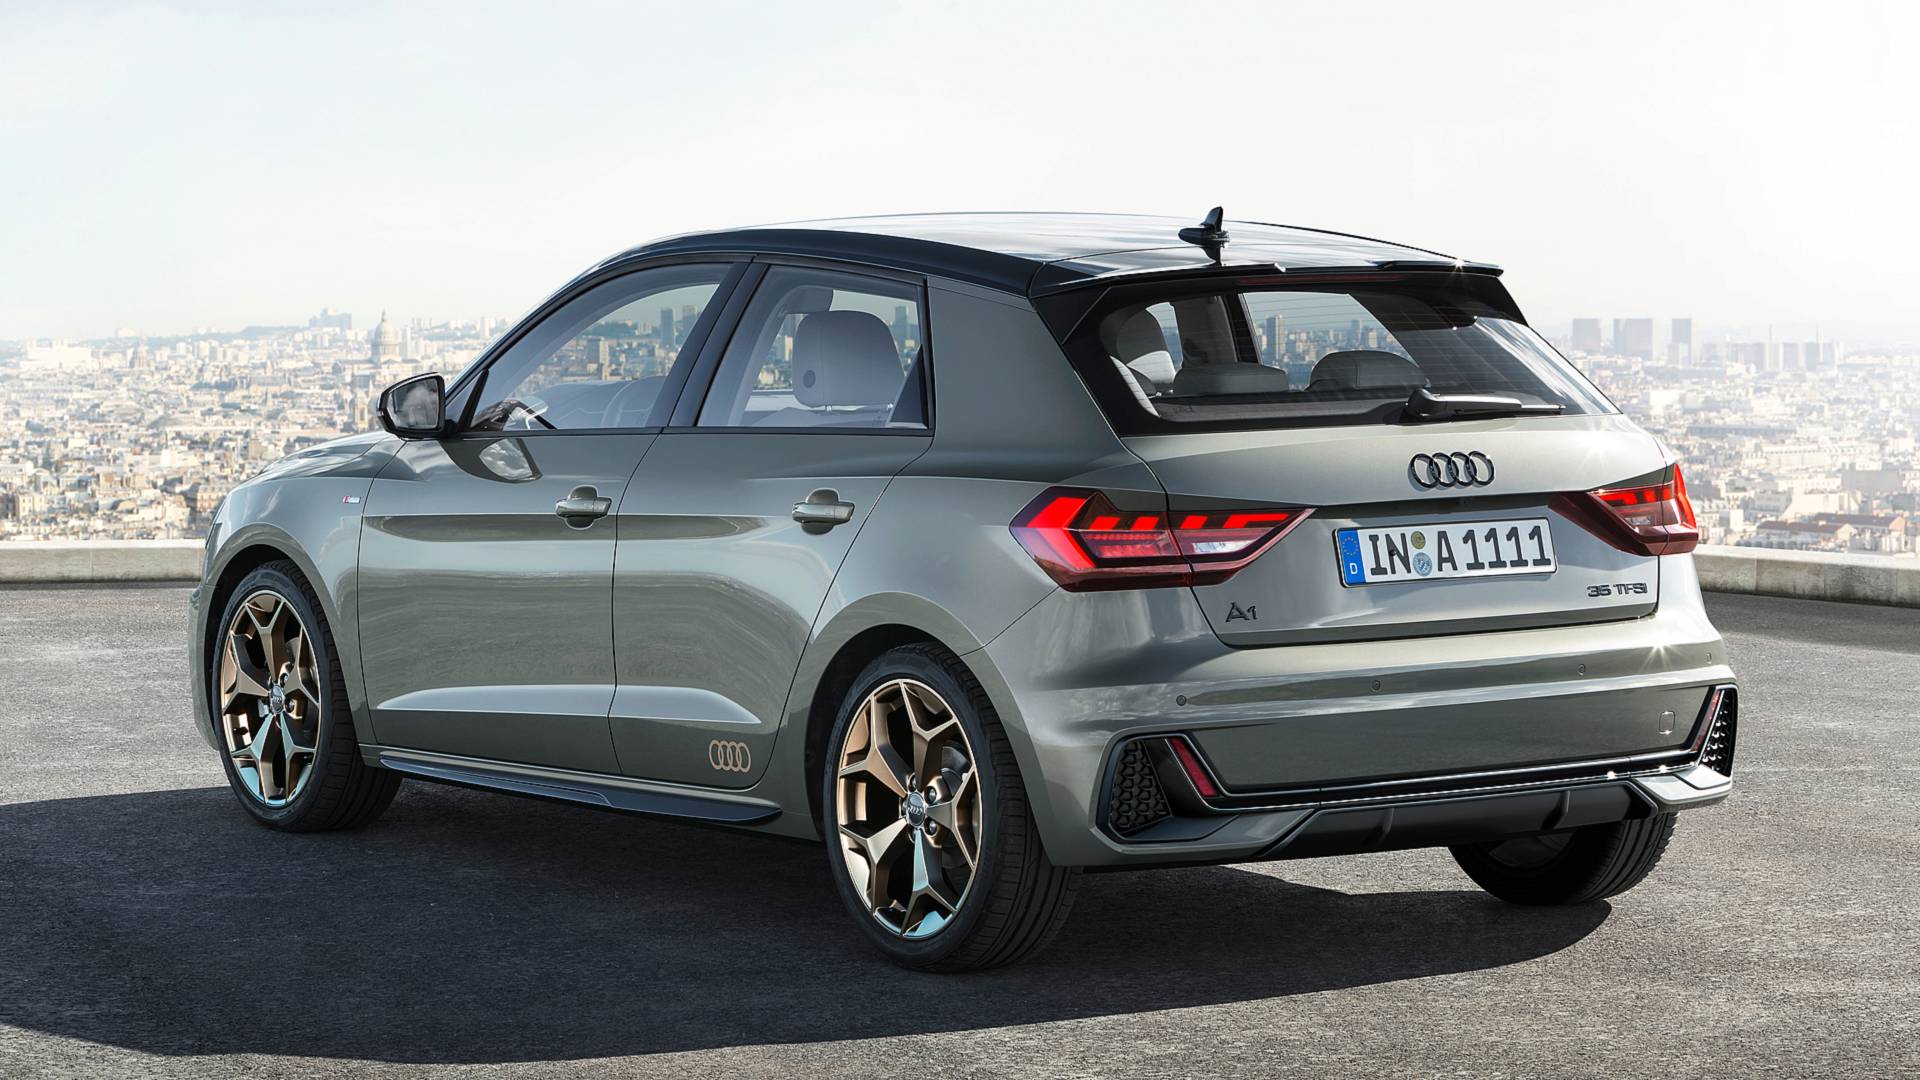 2019 Audi A1 Sportback: All The Details, Full Gallery And A Video